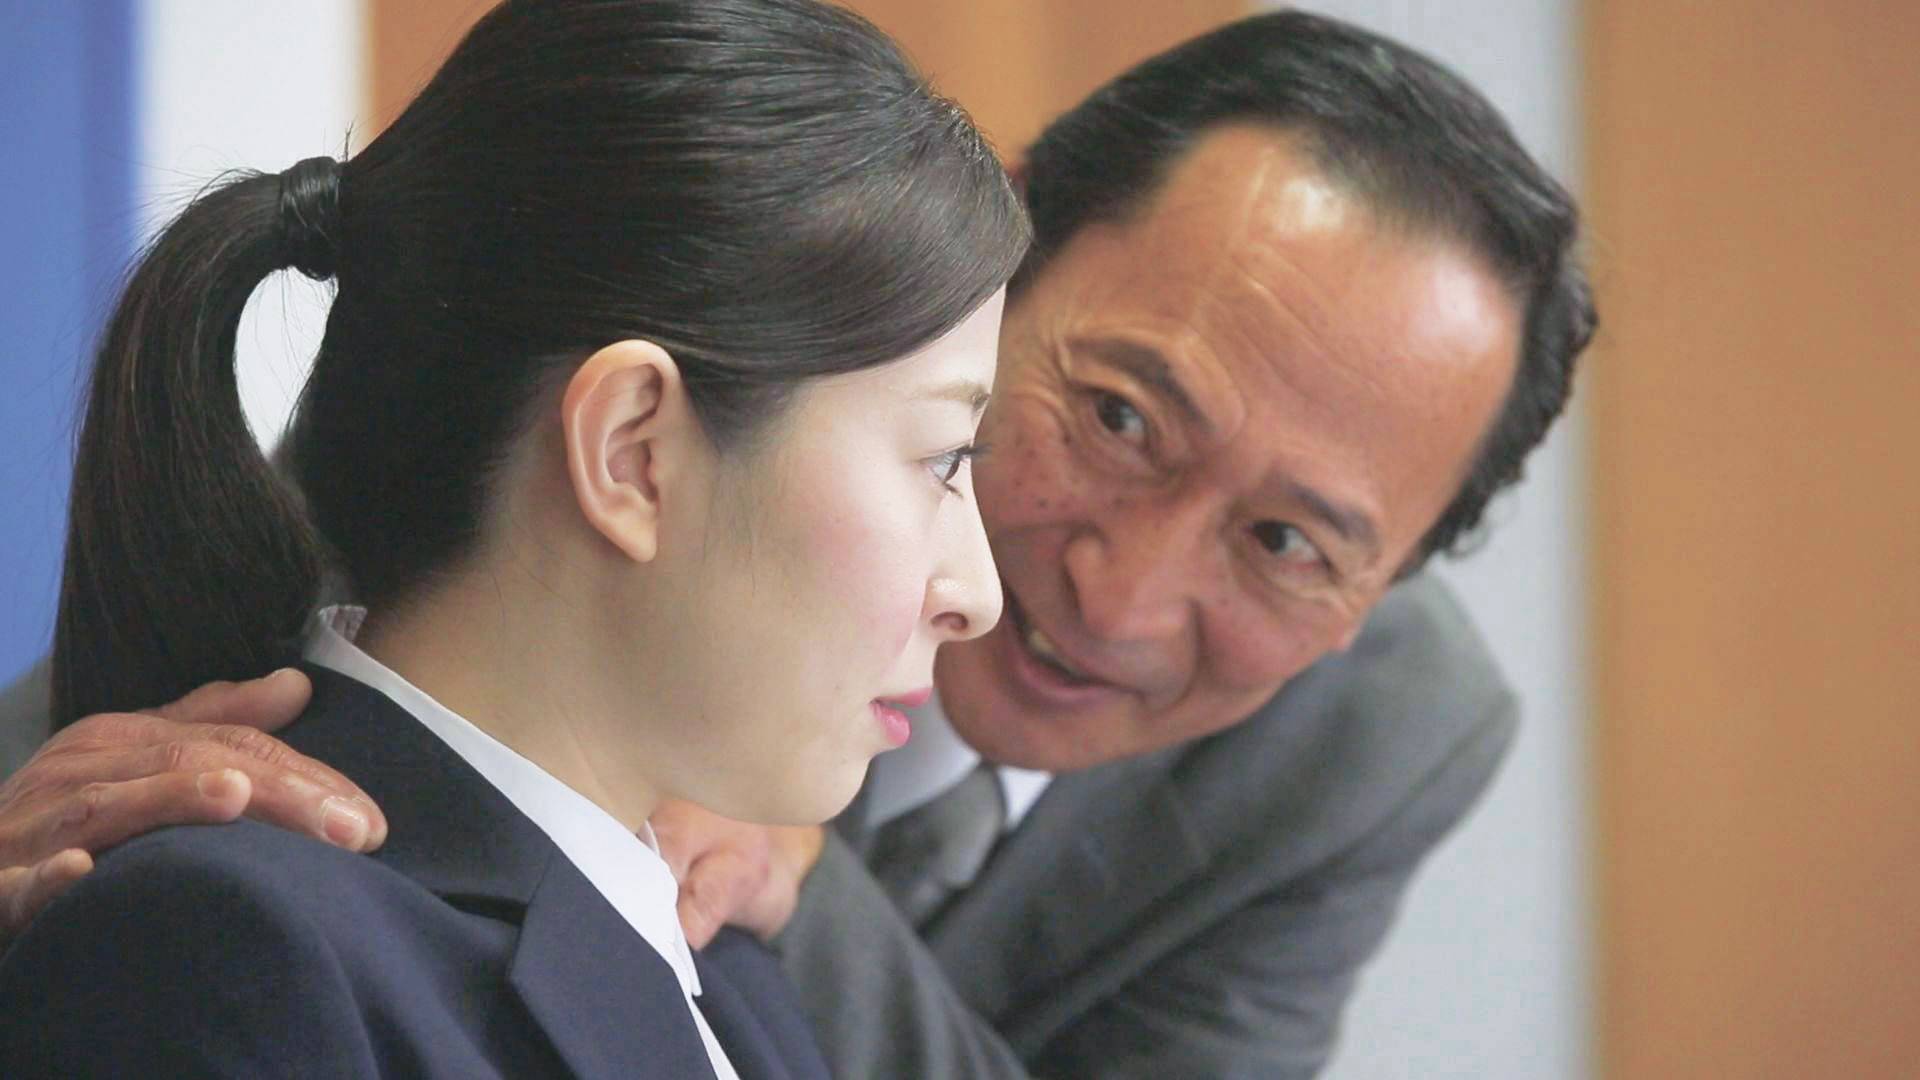 Japan's government releases video to help eradicate harassment from  politics | The Japan Times